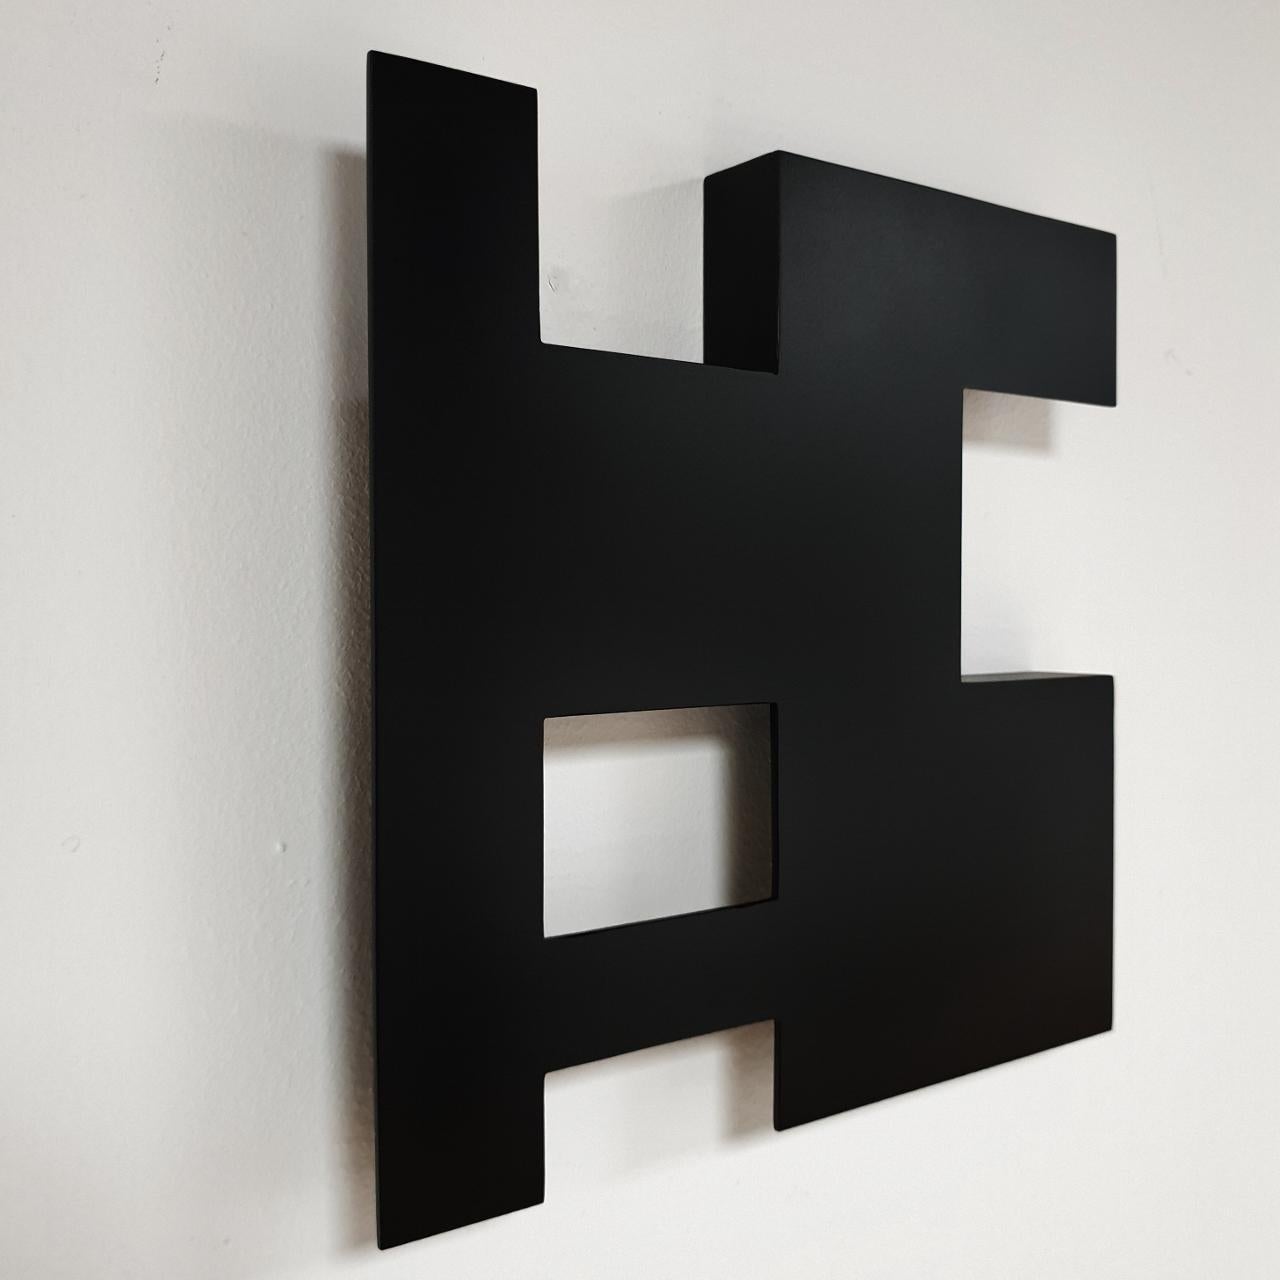 Steel 81 (iii) - contemporary modern geometric sculpture painting relief - Abstract Geometric Sculpture by Carl Möller